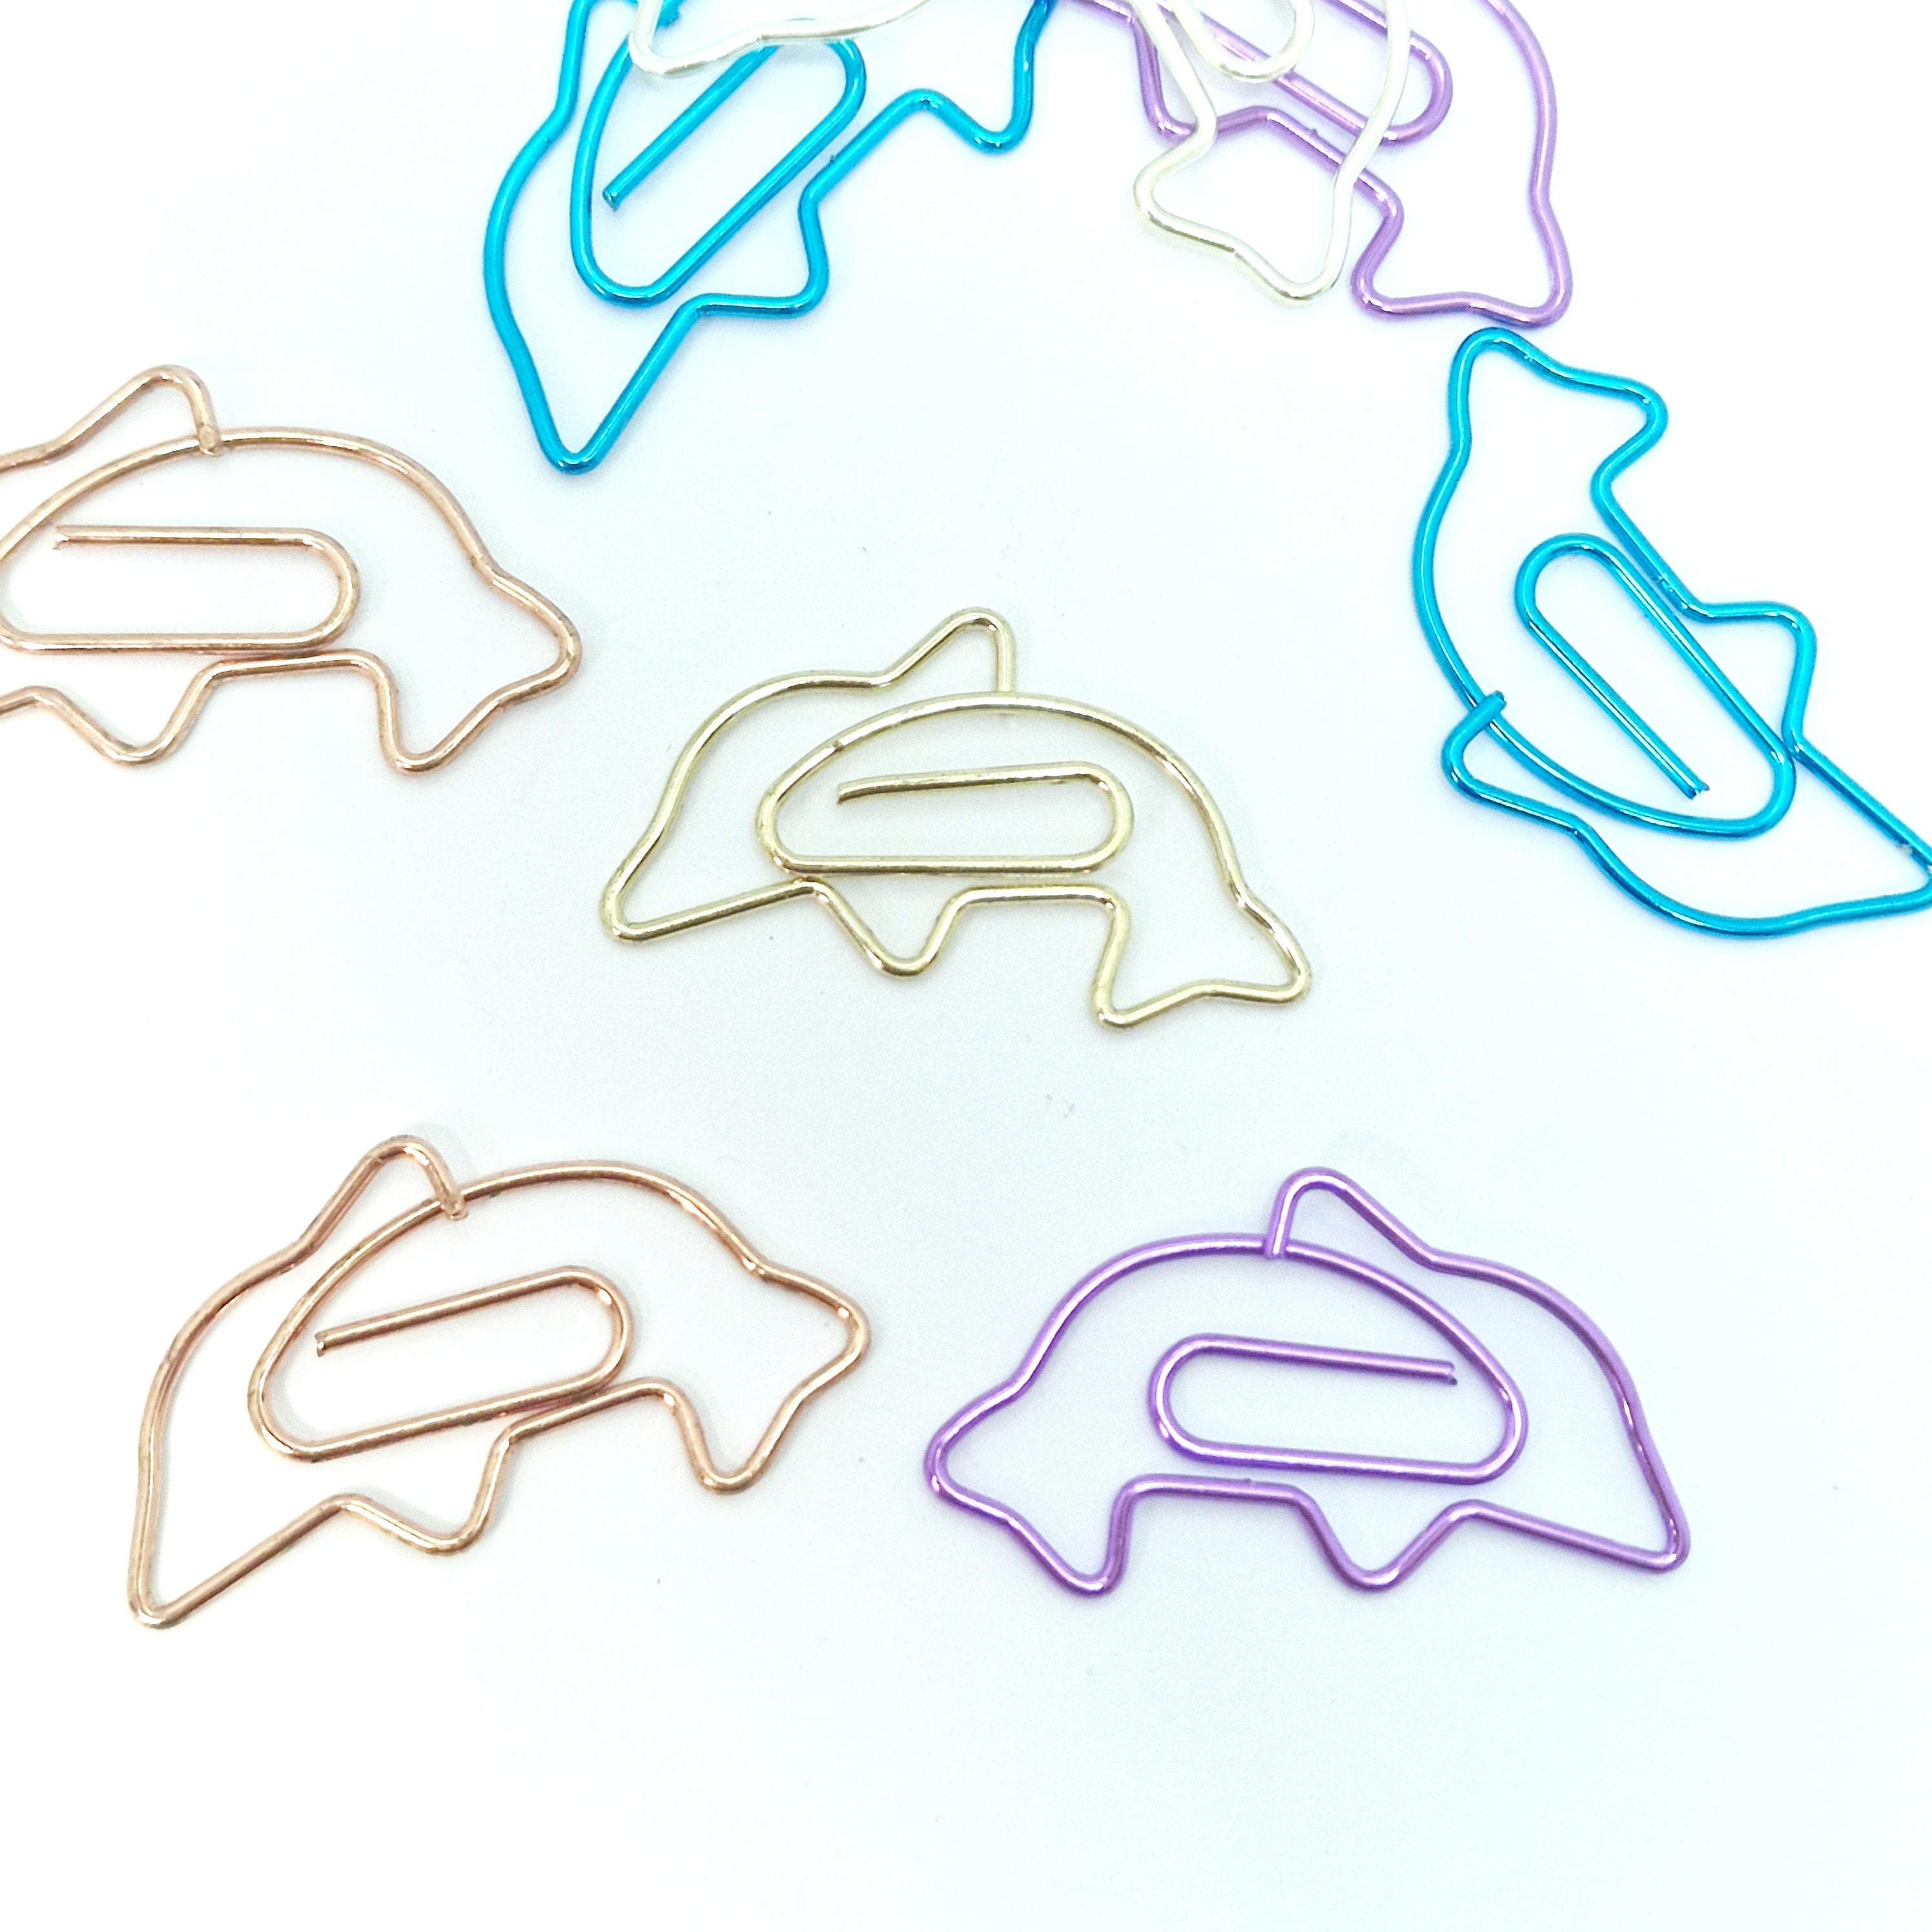 MajorCrafts 10pcs Mixed Colours Dolphin Shaped Novelty Metal Paper Clips 32x18mm